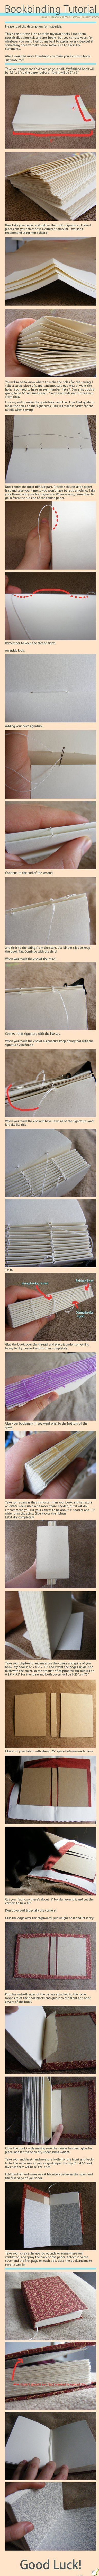 How to: book-bind